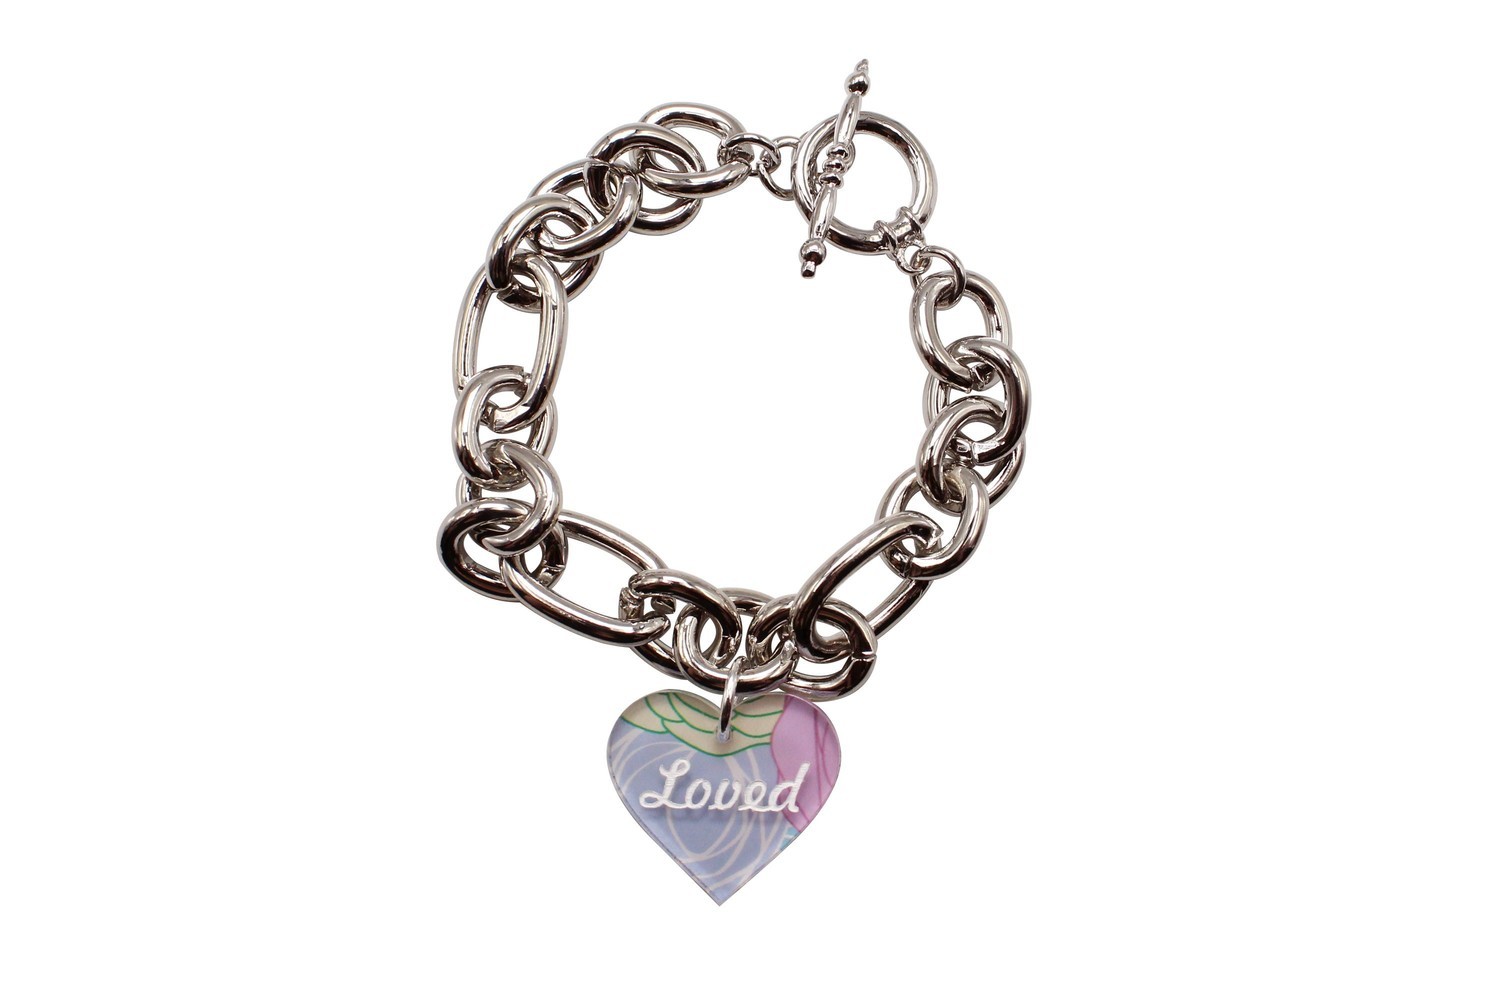 Custom Heart Charm with Name or Saying on Decorative Rope Bracelet